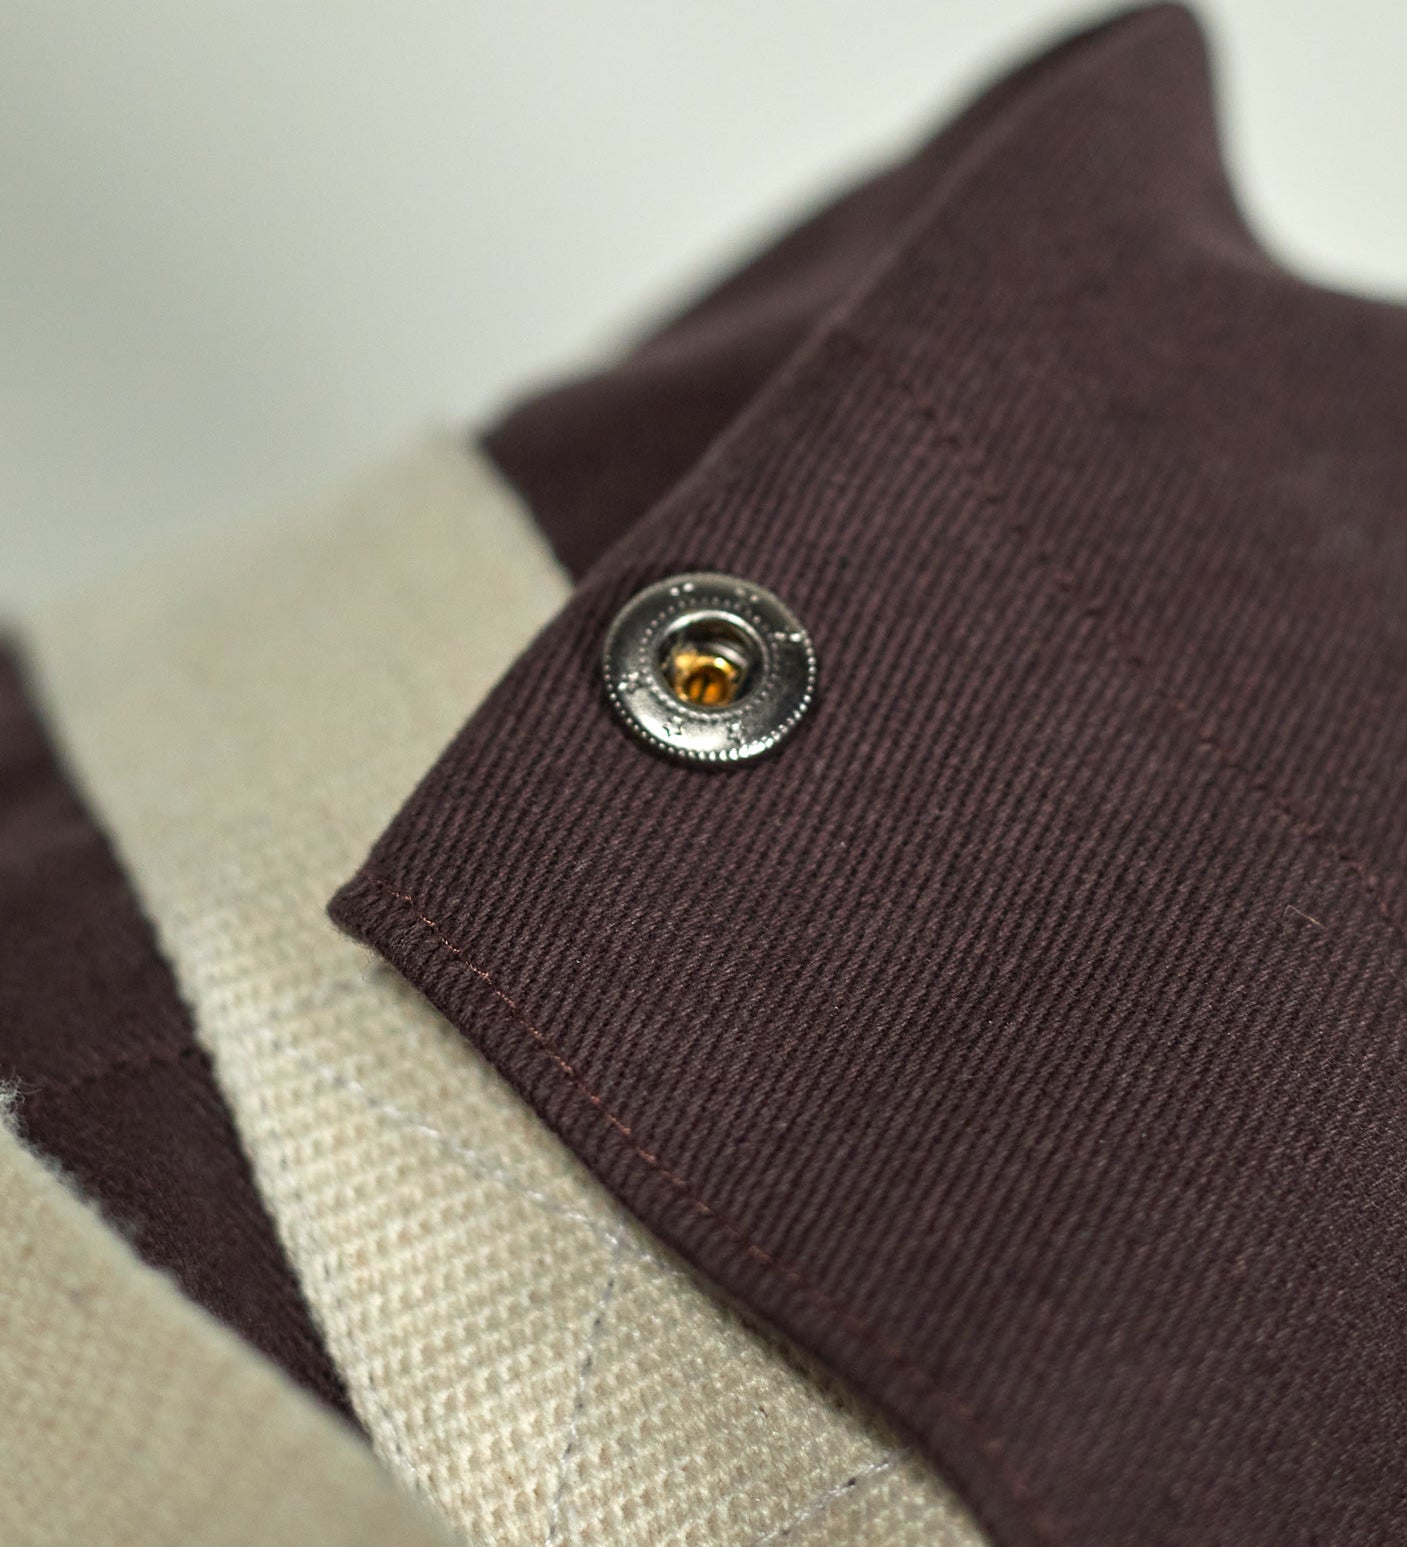 Press-stud fastenings to adjust the size of the cotton drill Uskees #0401 basin bag in dark plum.